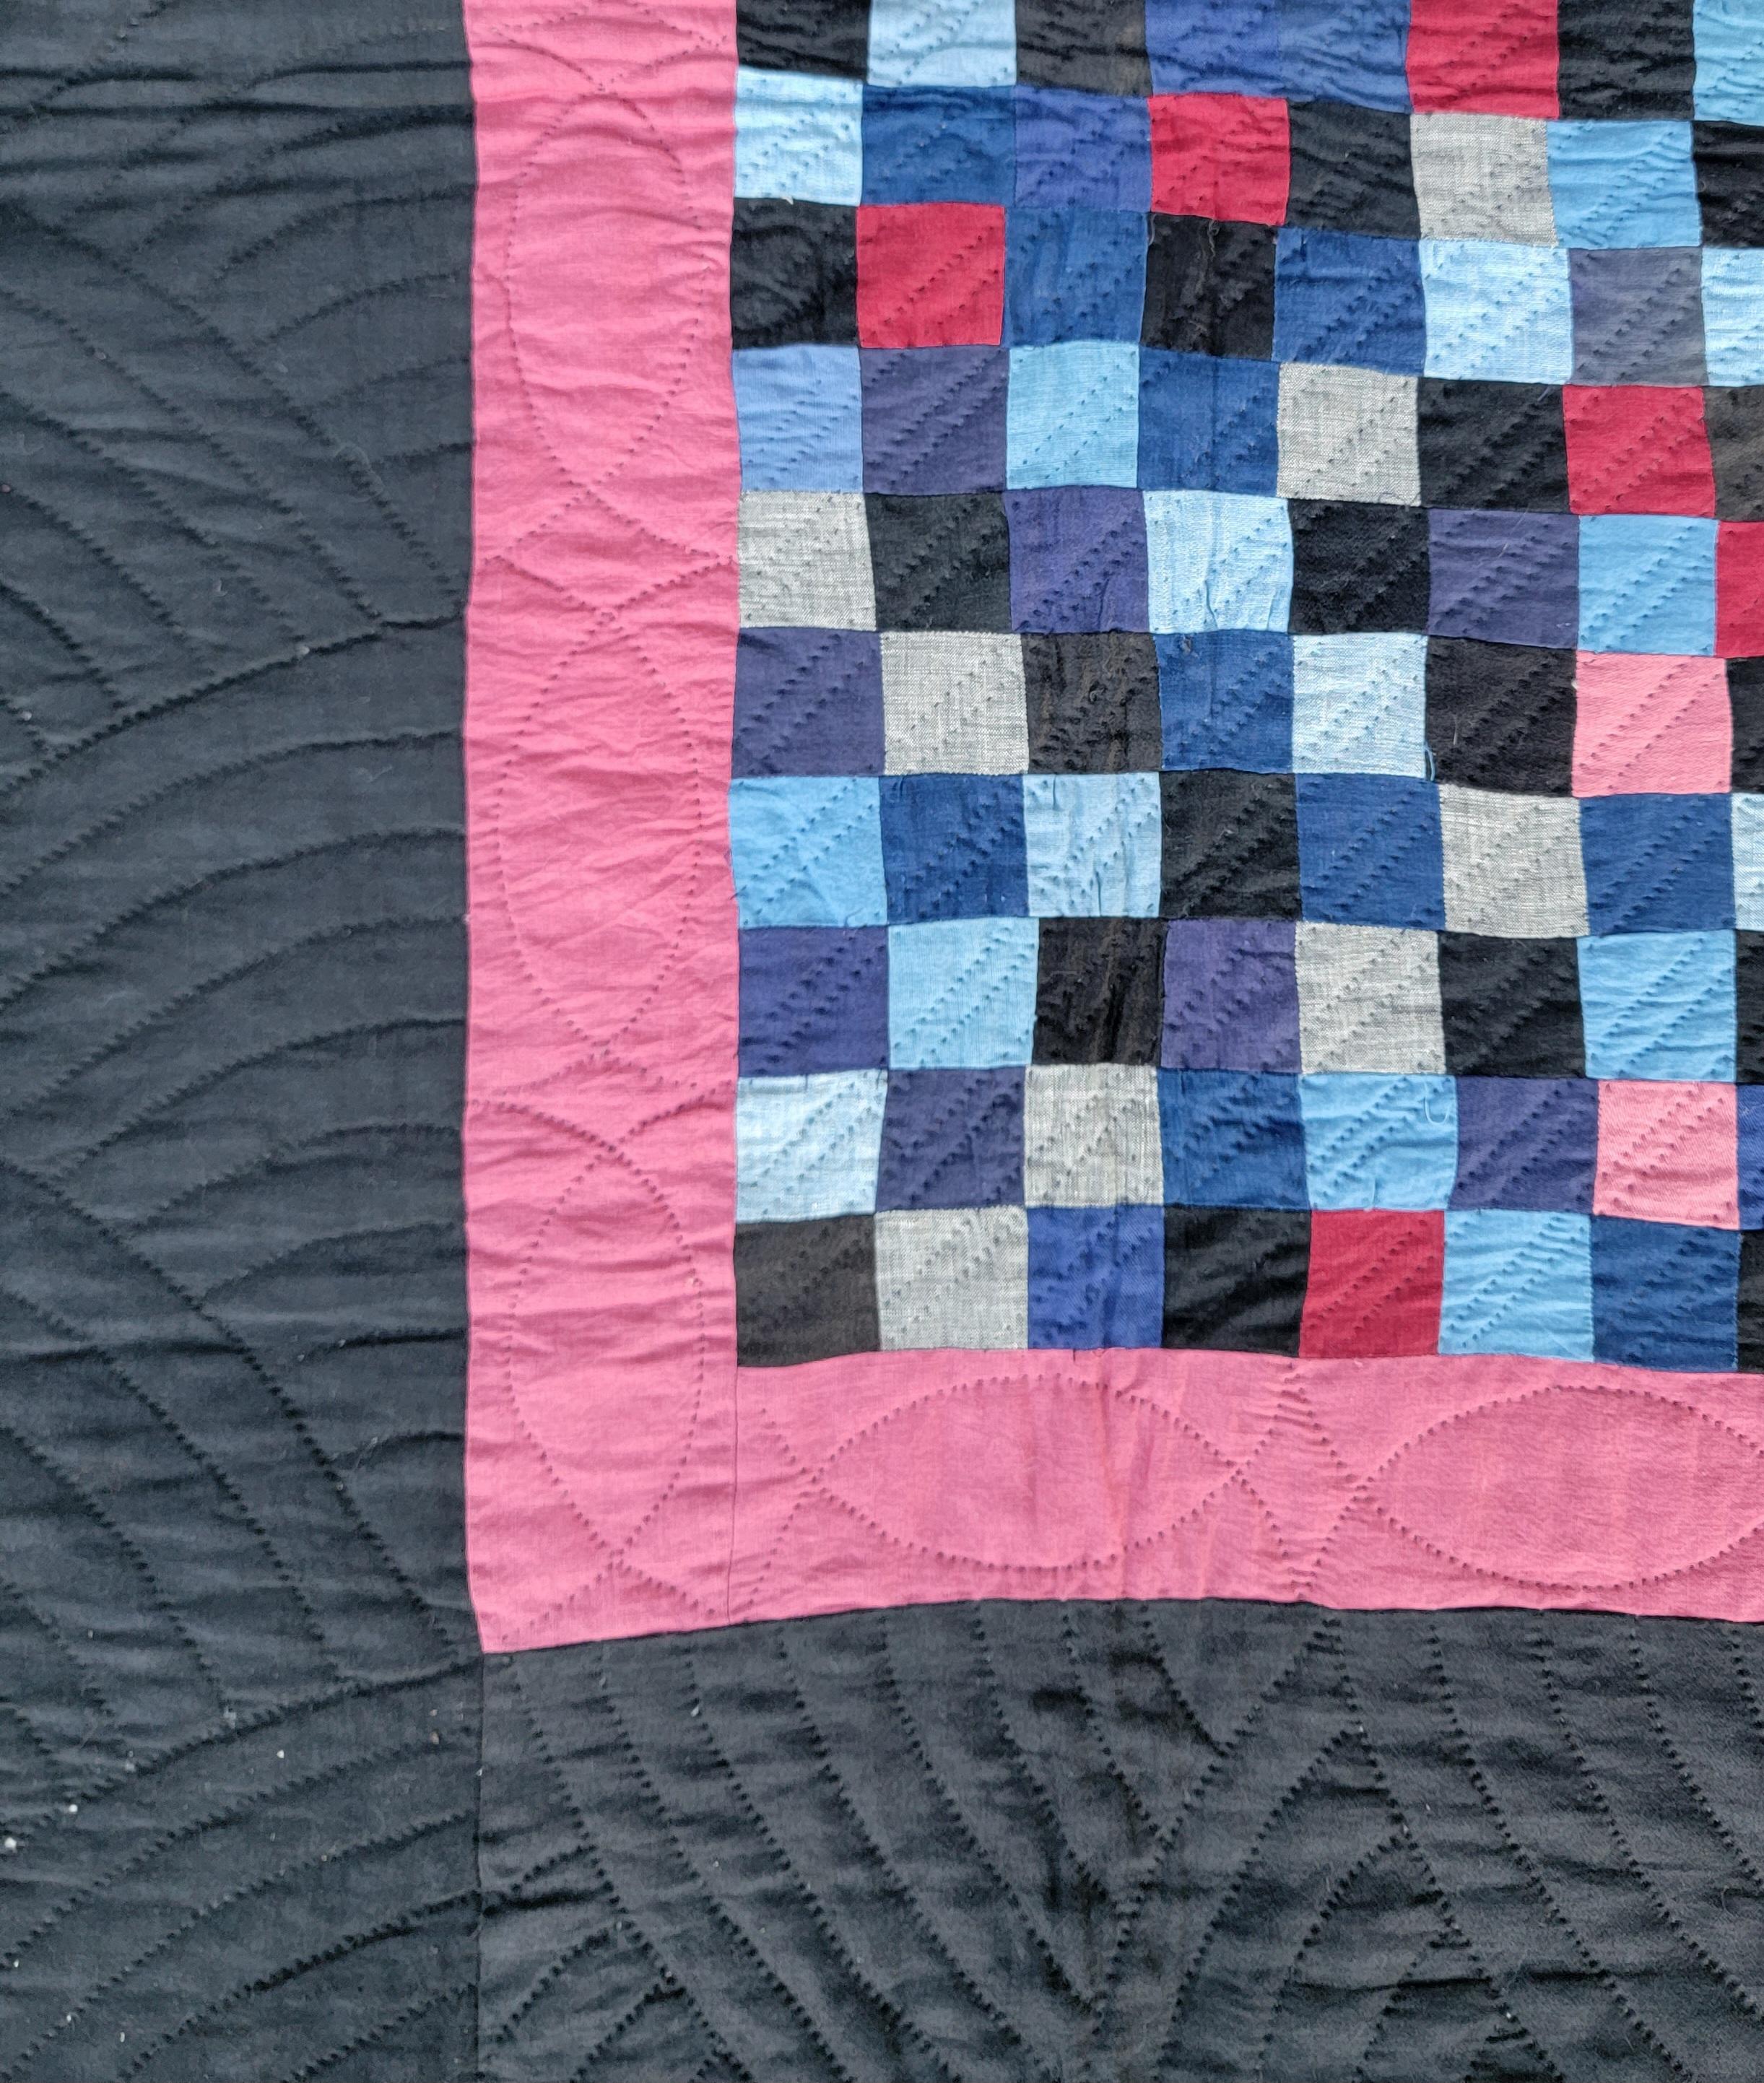 This fine most unusual one patch Ohio Amish crib quilt has vivid colors on a black cotton sateen ground. It comes to us from a fifty year old collection.The condition is pristine and unwashed or used.This is quite a rare crib quilt from Holmes